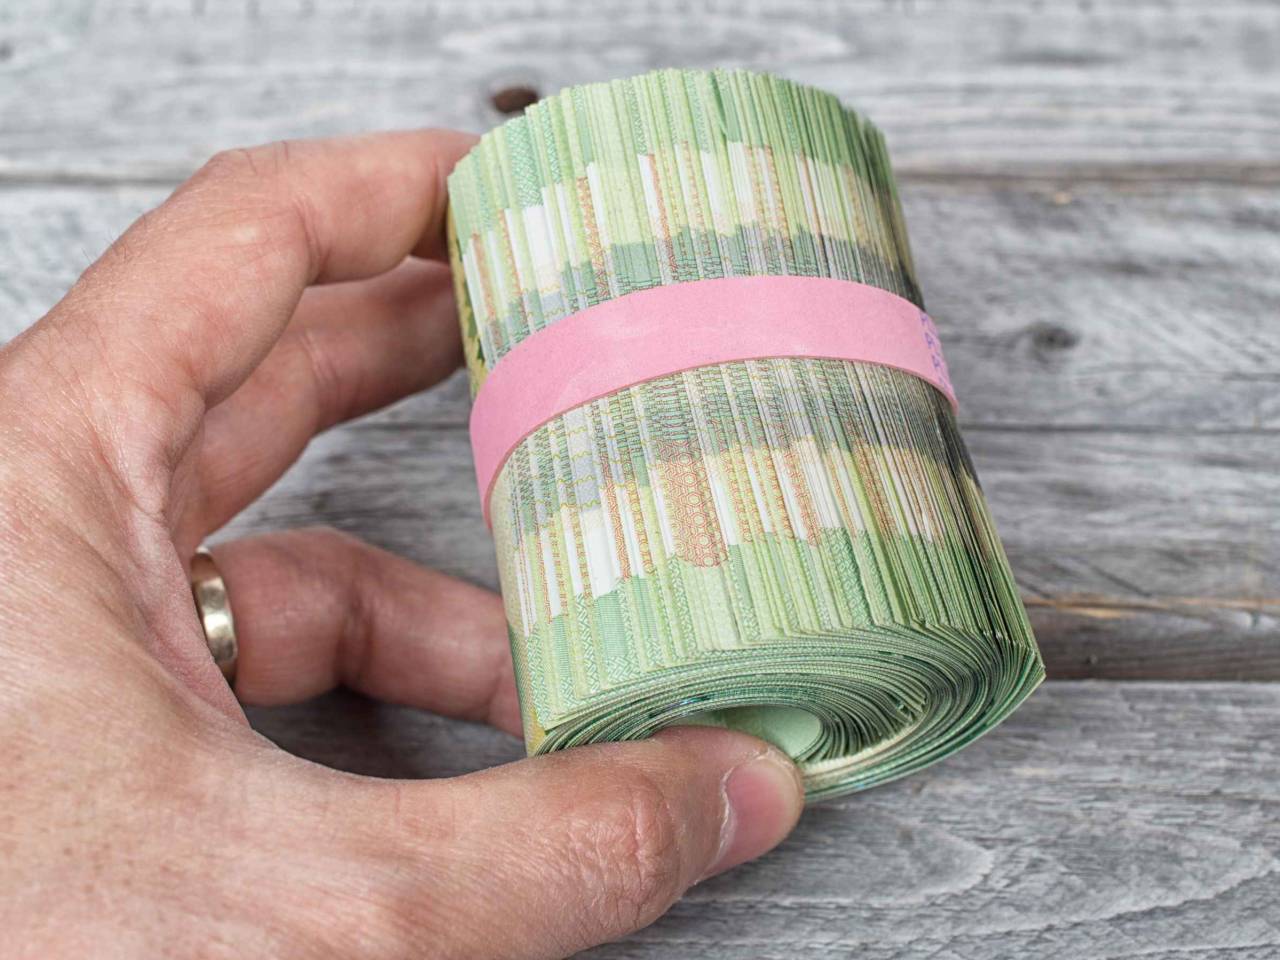 Hand holding a roll full of green bank notes against a wooden background